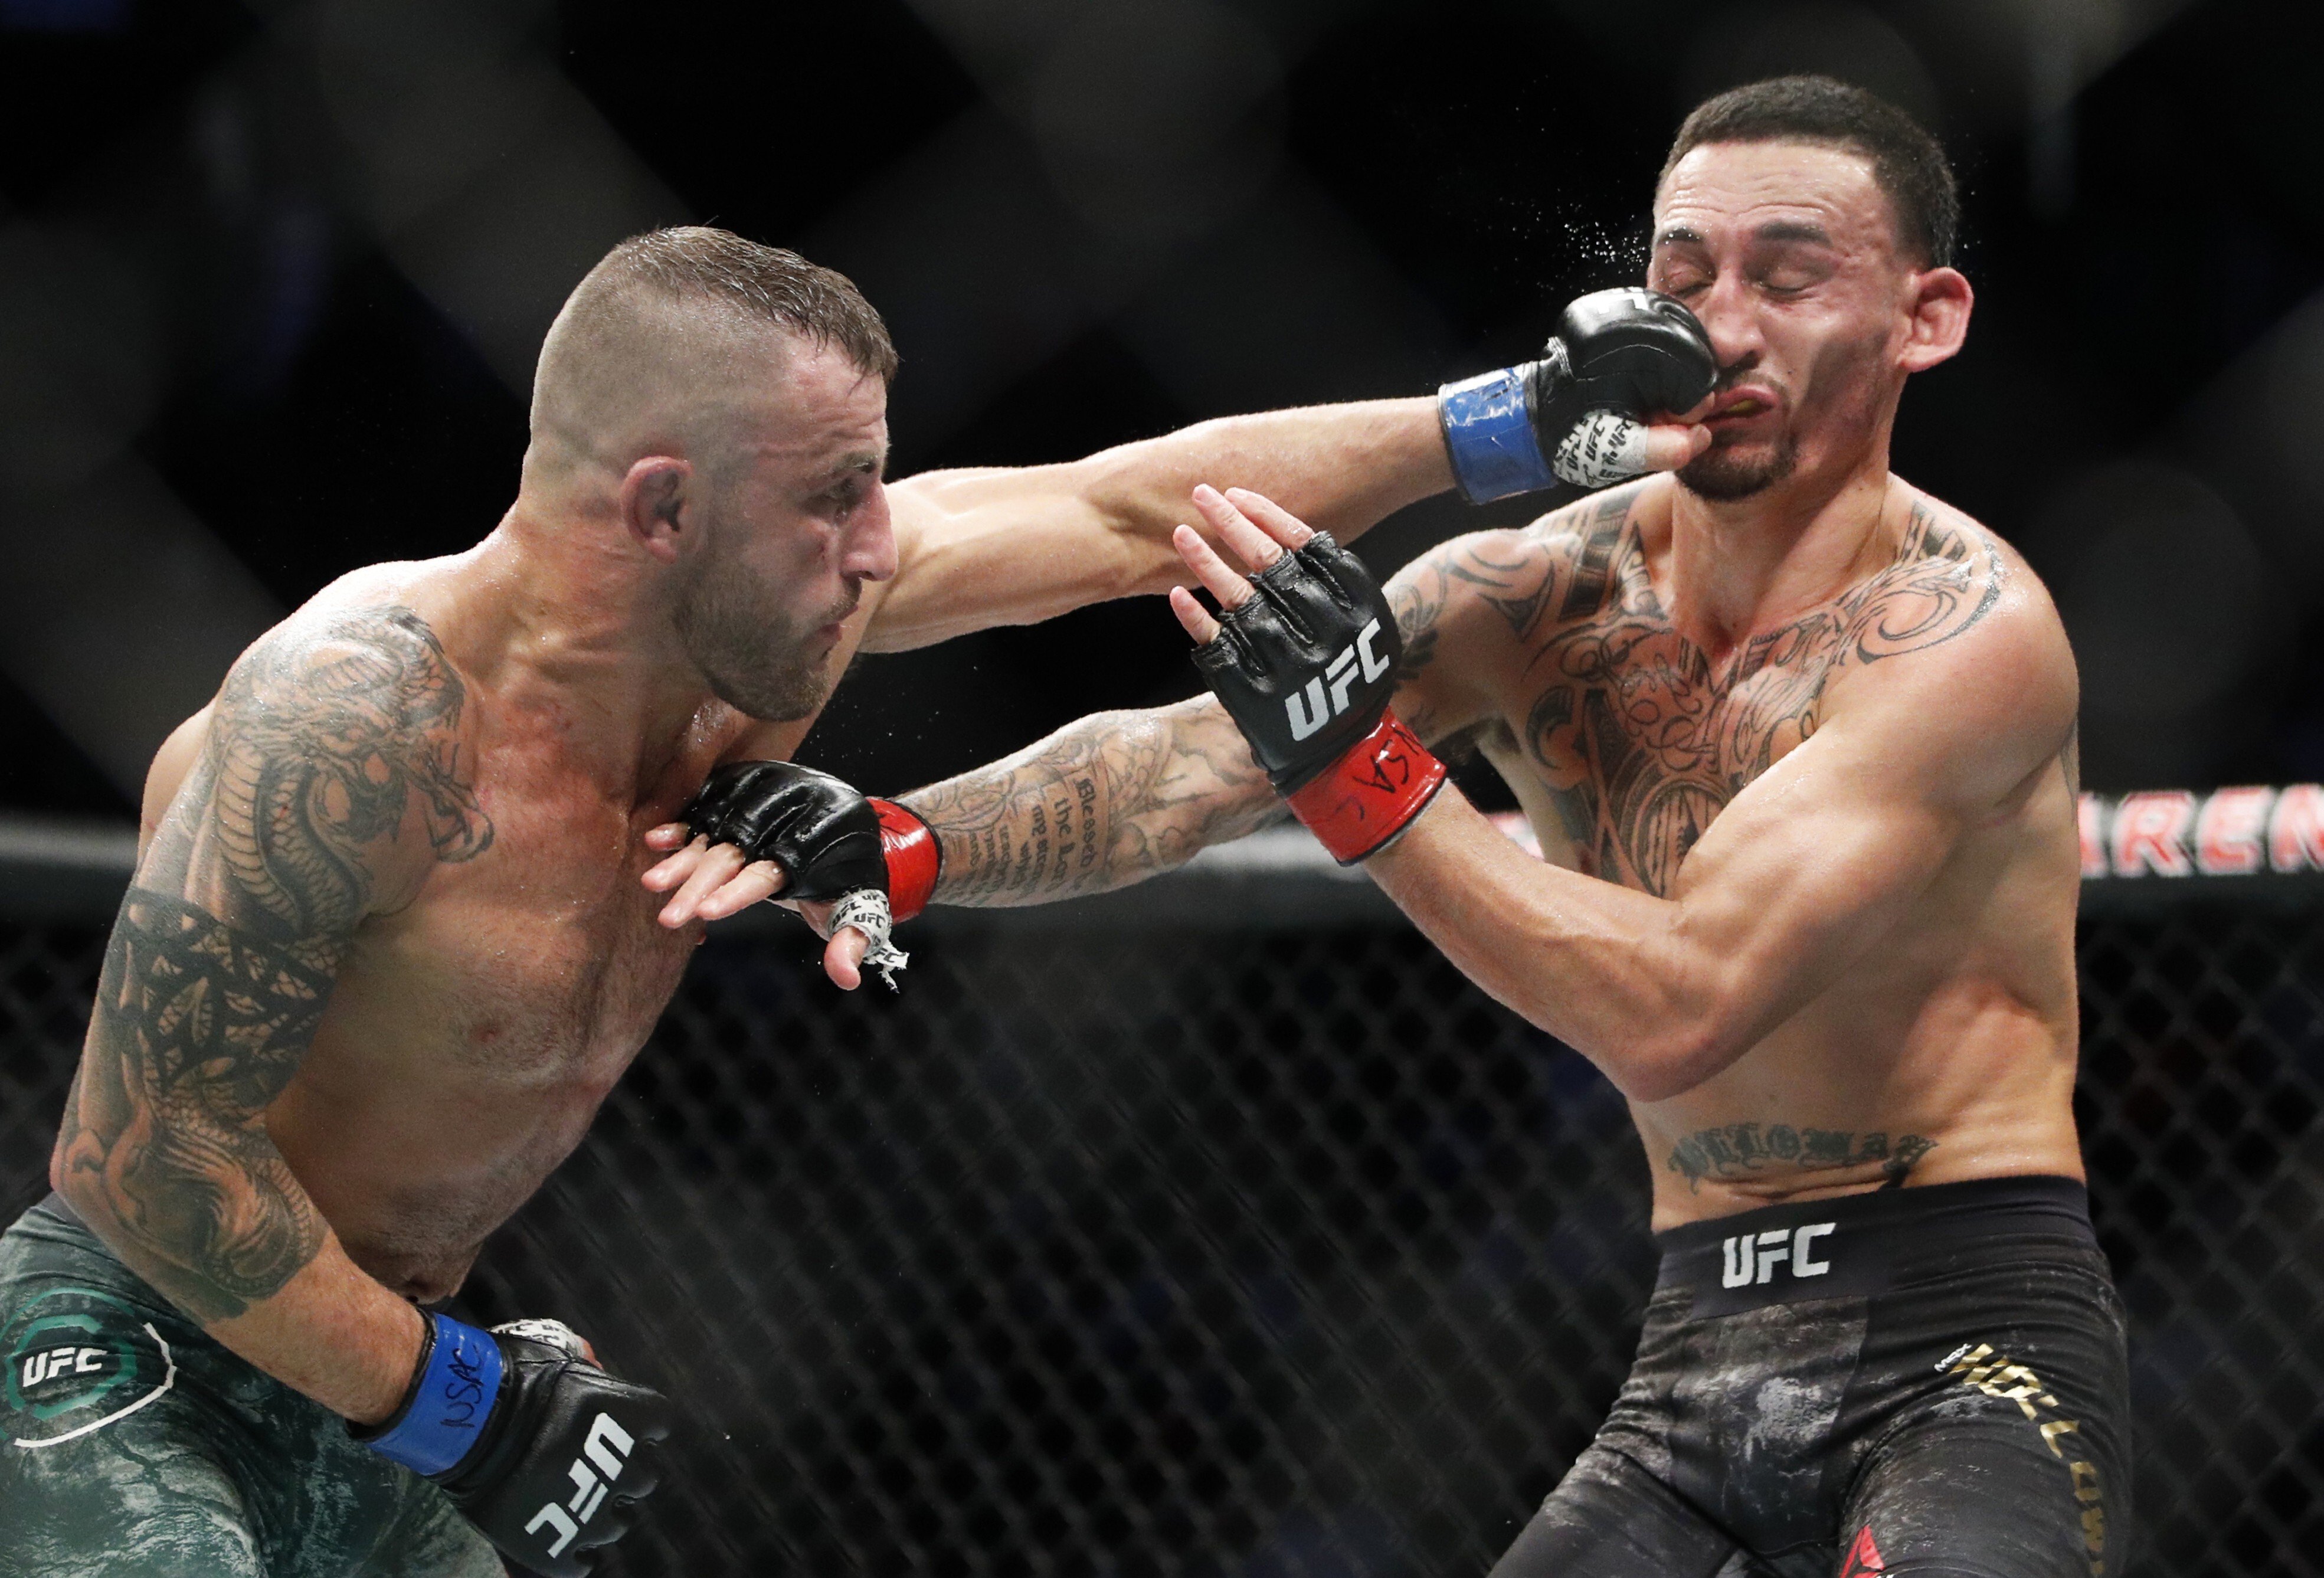 UFC featherweight champion Alexander Volkanovski hits Max Holloway in their featherweight title bout at UFC 245 in Las Vegas, Nevada, in December 2019. Photo: AP